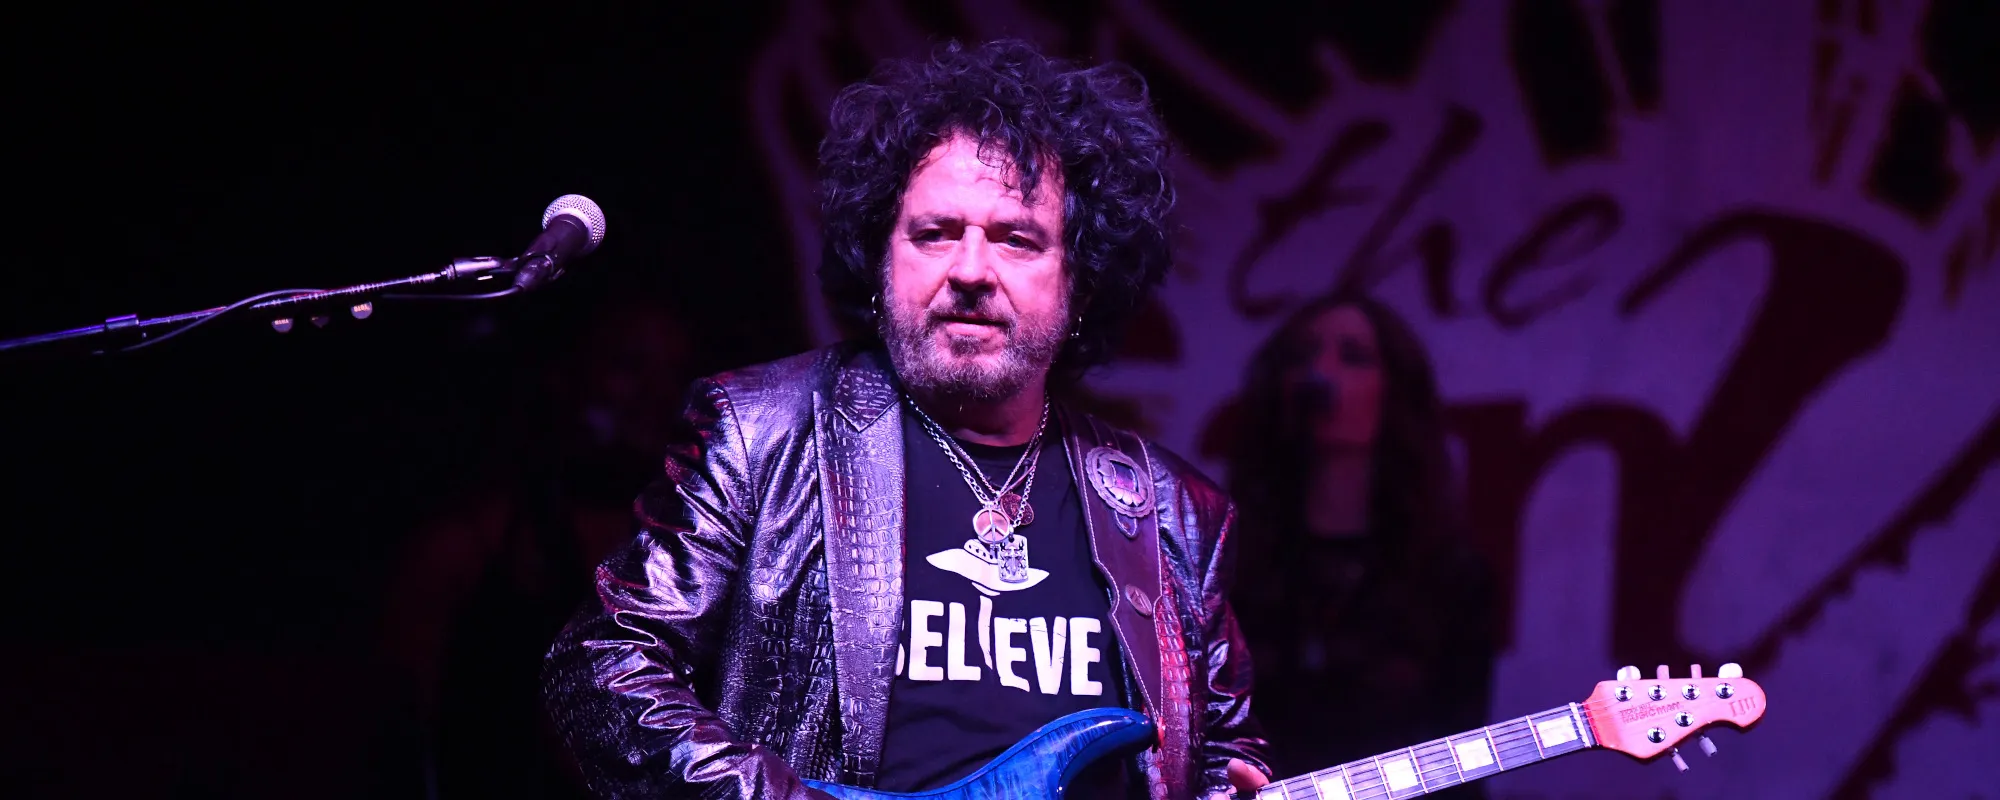 Steve Lukather Says Upcoming Solo Album is “In the Style of” Toto